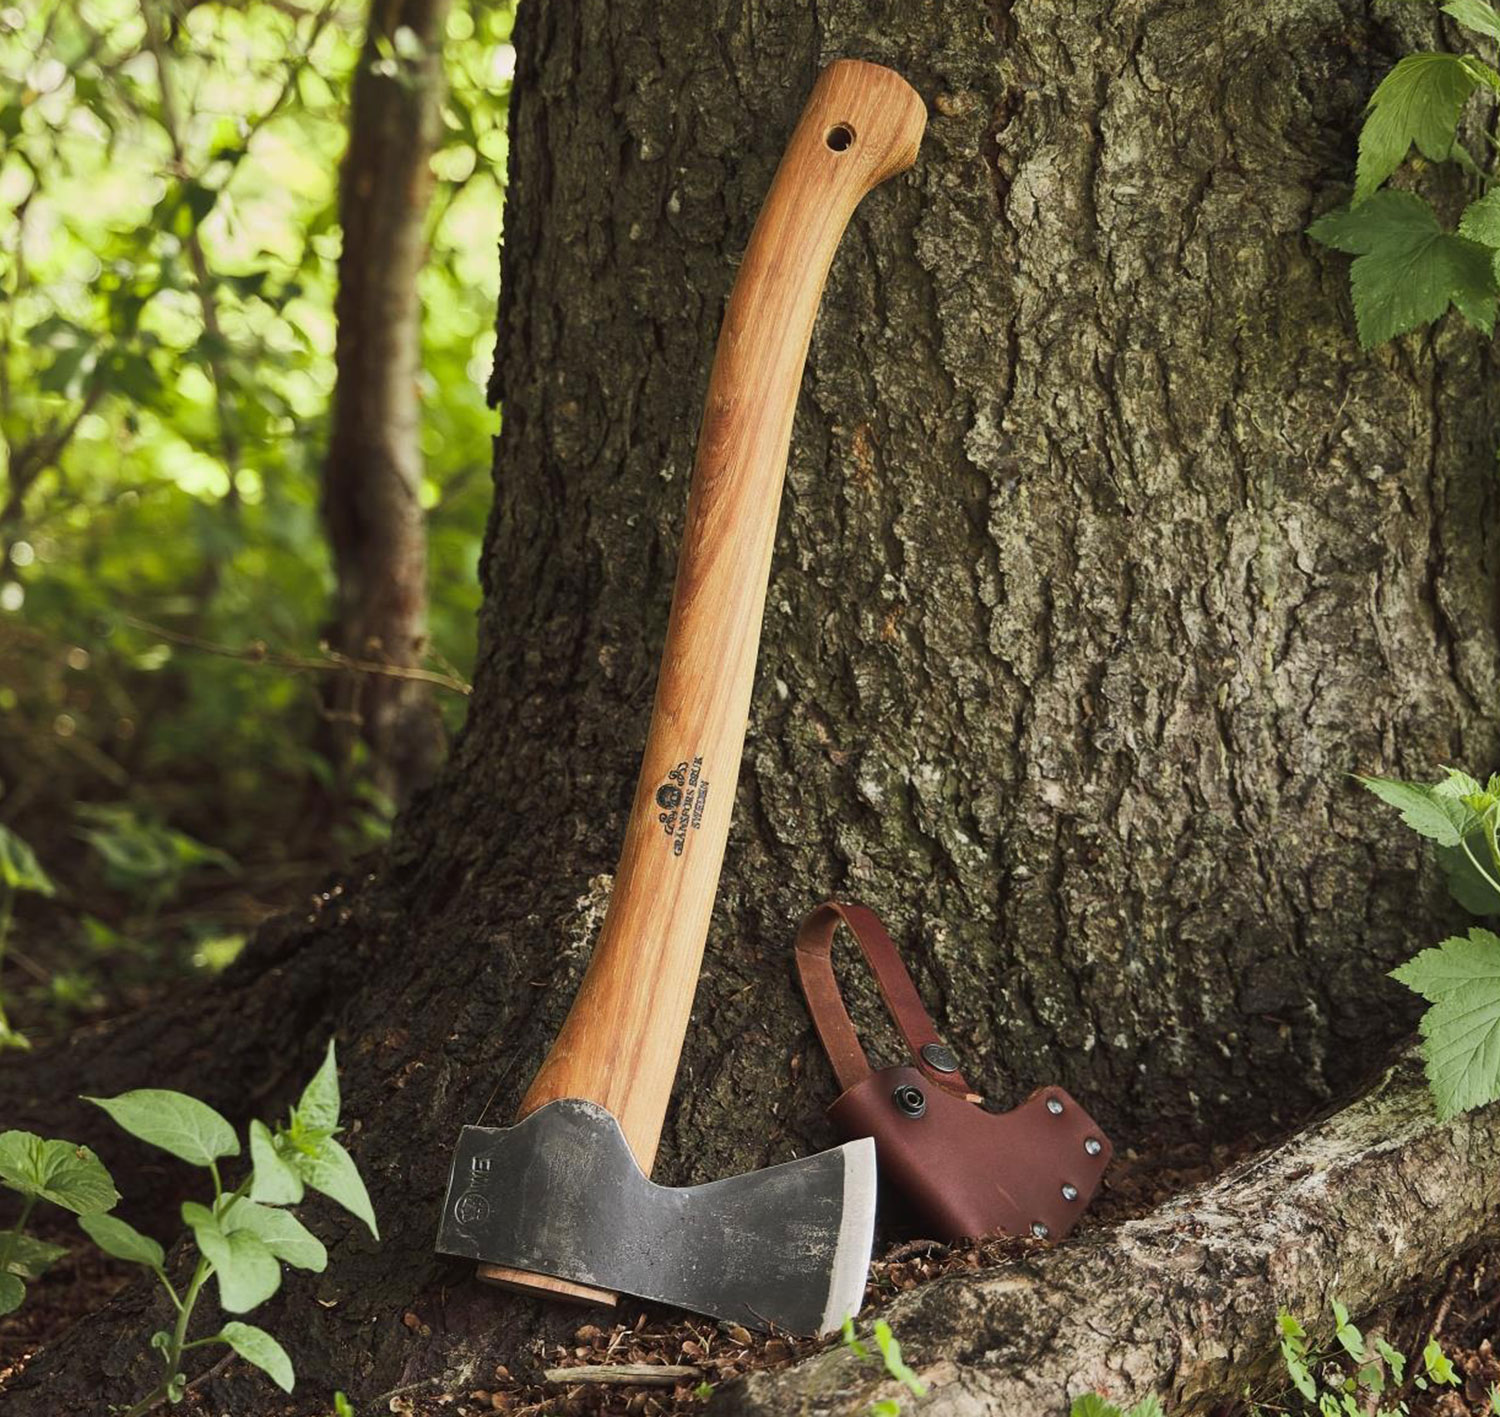 A Gransfors small forest axe leaning against a tree.